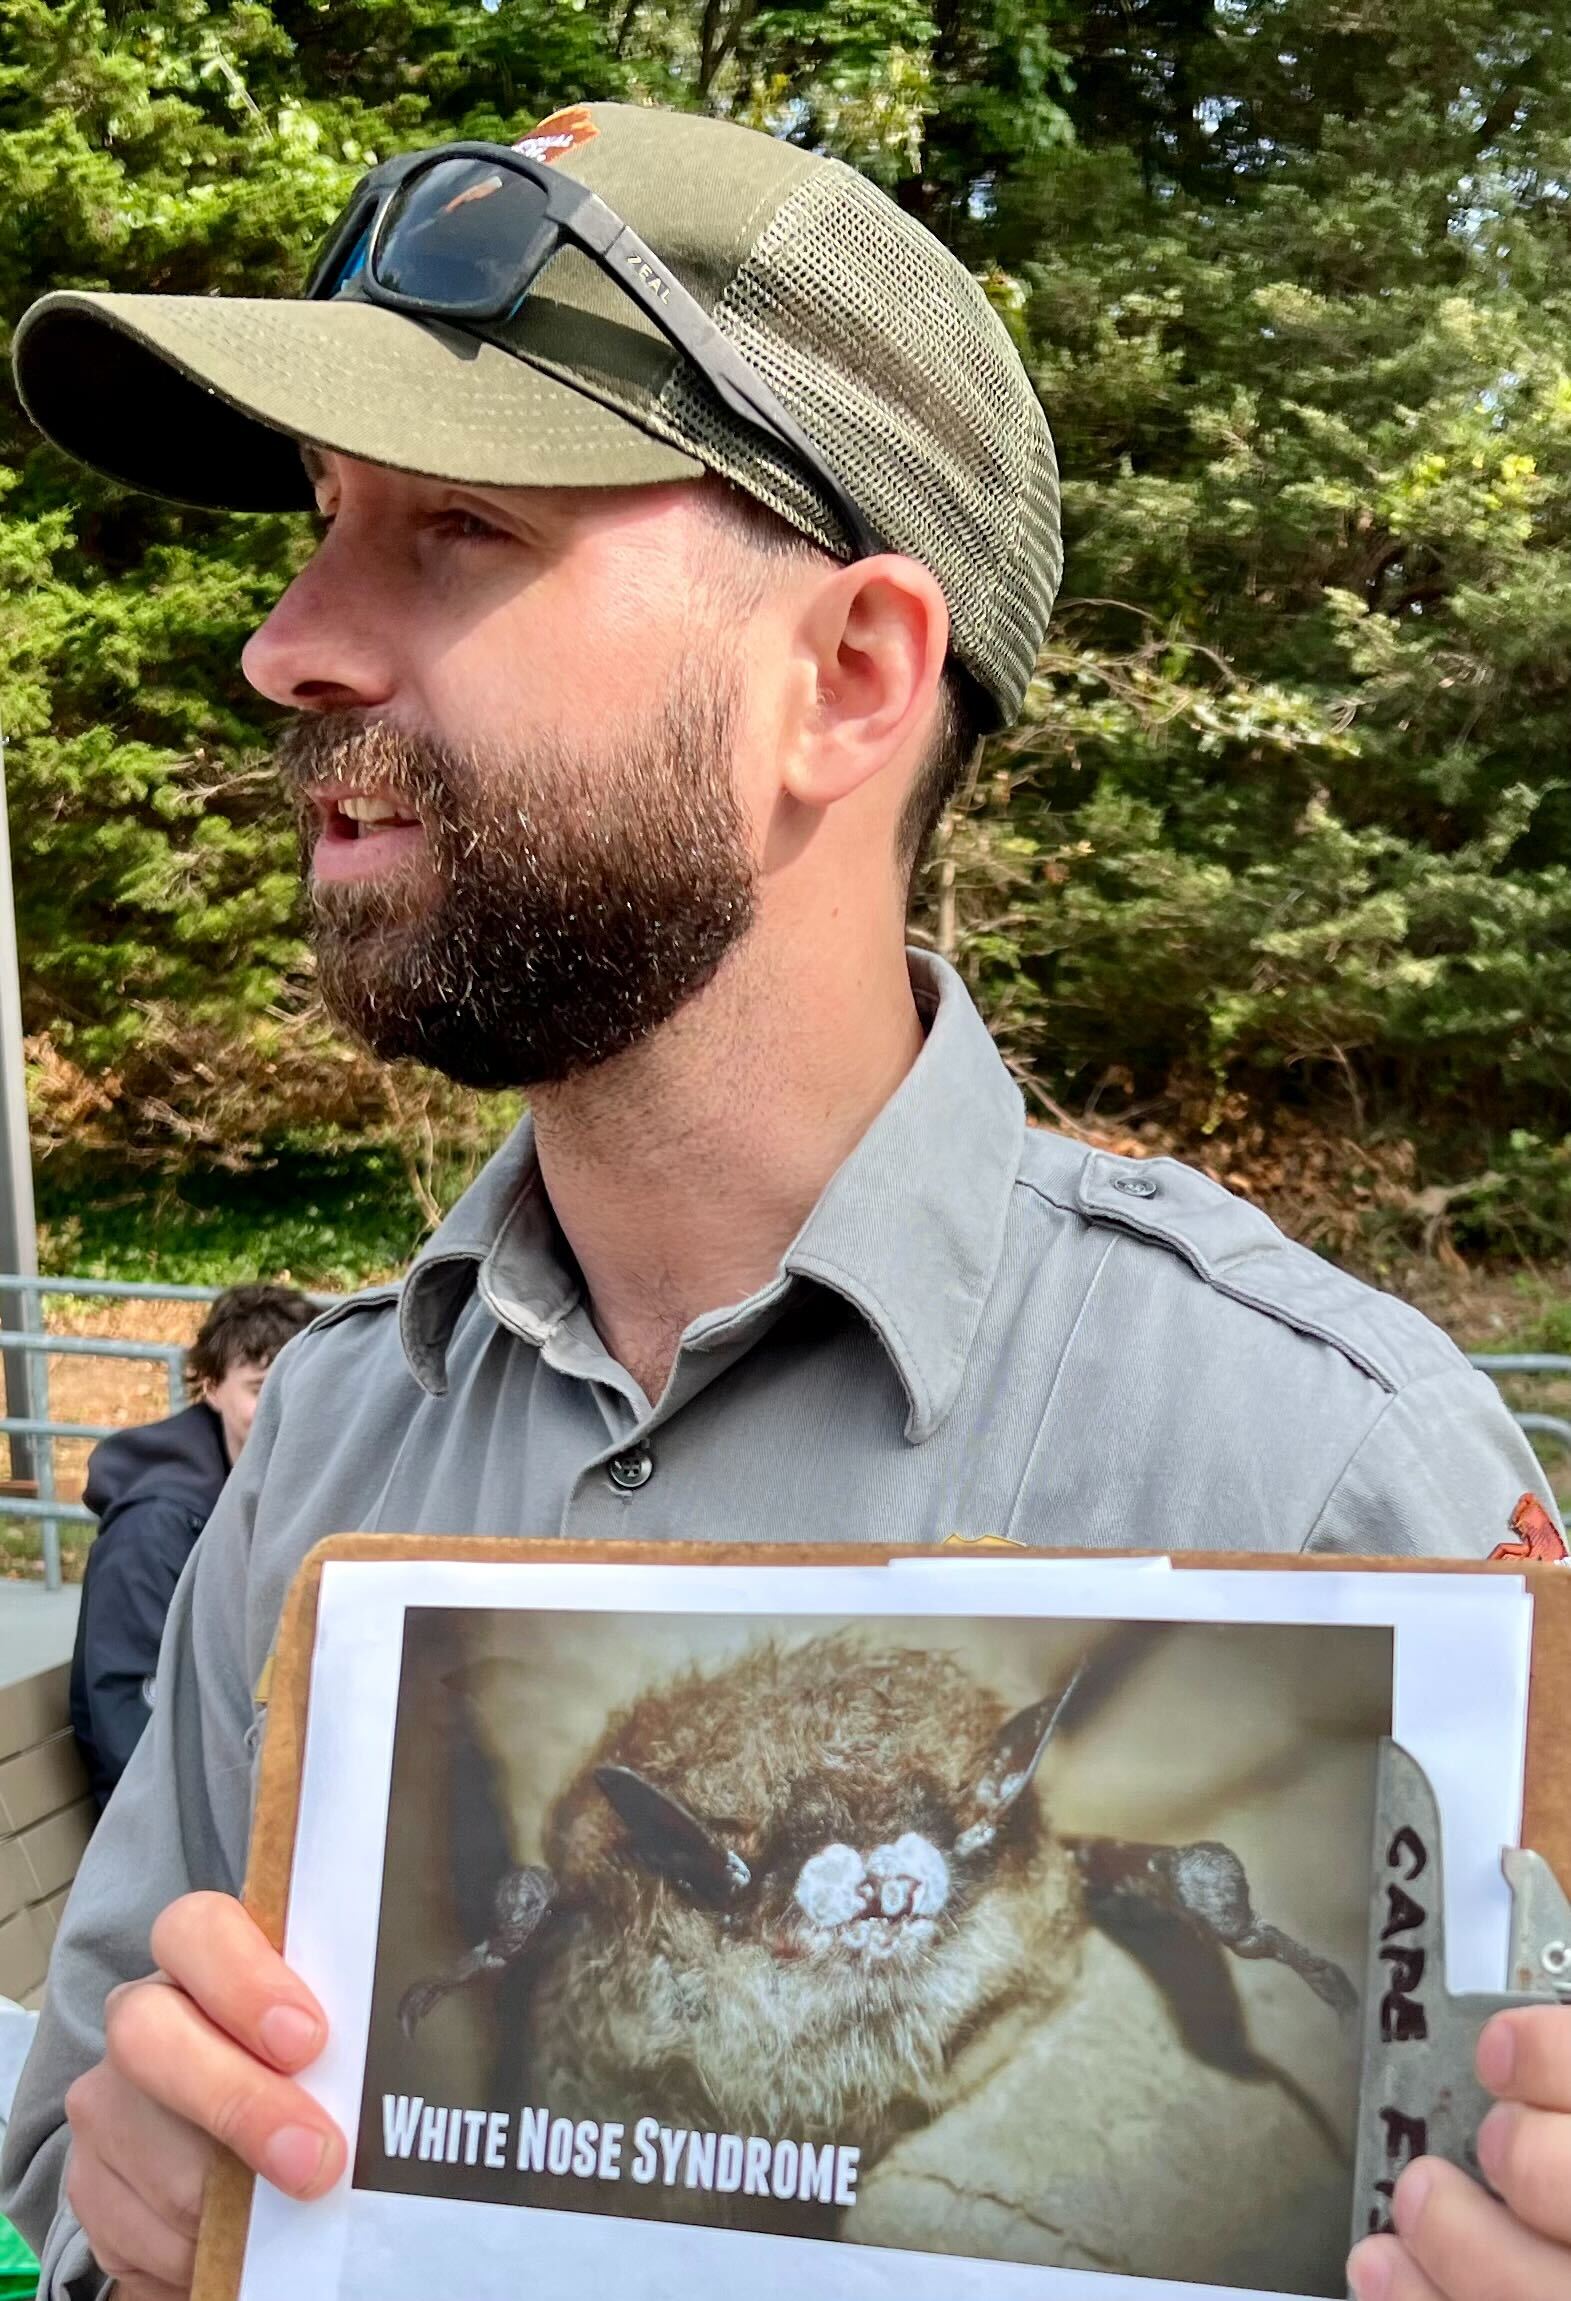 Michael Raymonds with the National Park Service shows volunteers a photo of an endangered Little Brown Bat suffering from White Nose Syndrome.